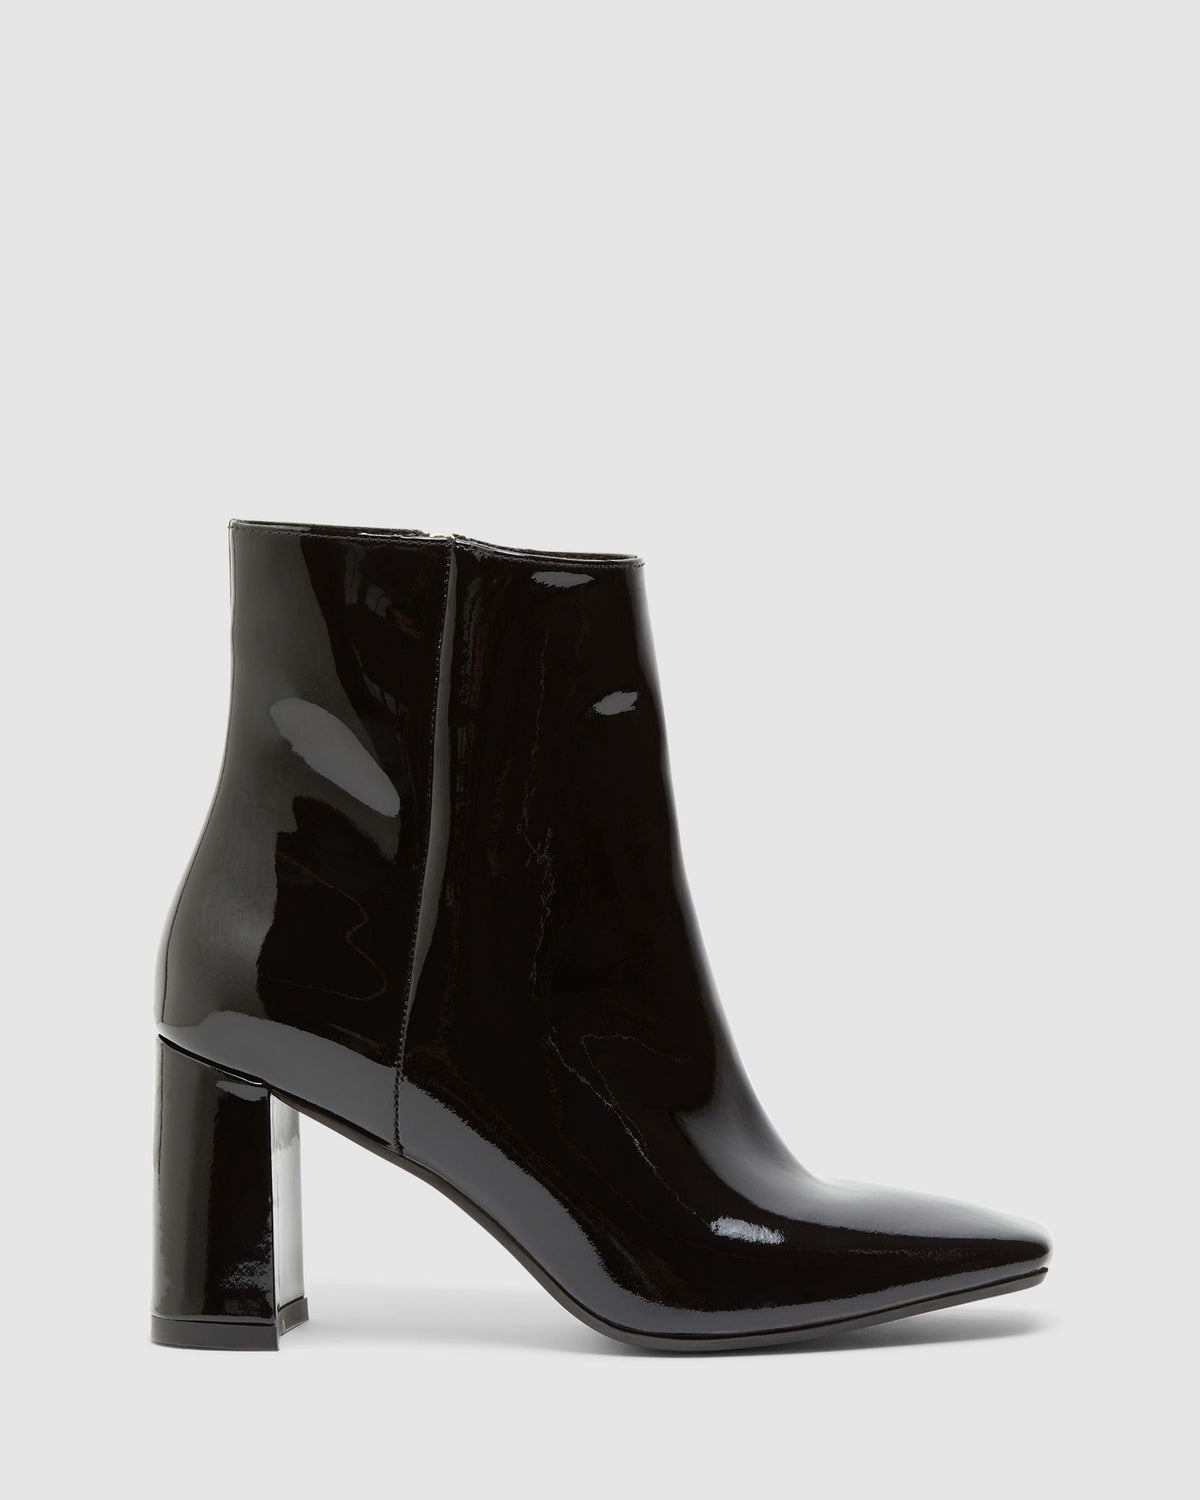 ARRIVA GLOSS LEATHER BOOT WOMENS SHOES